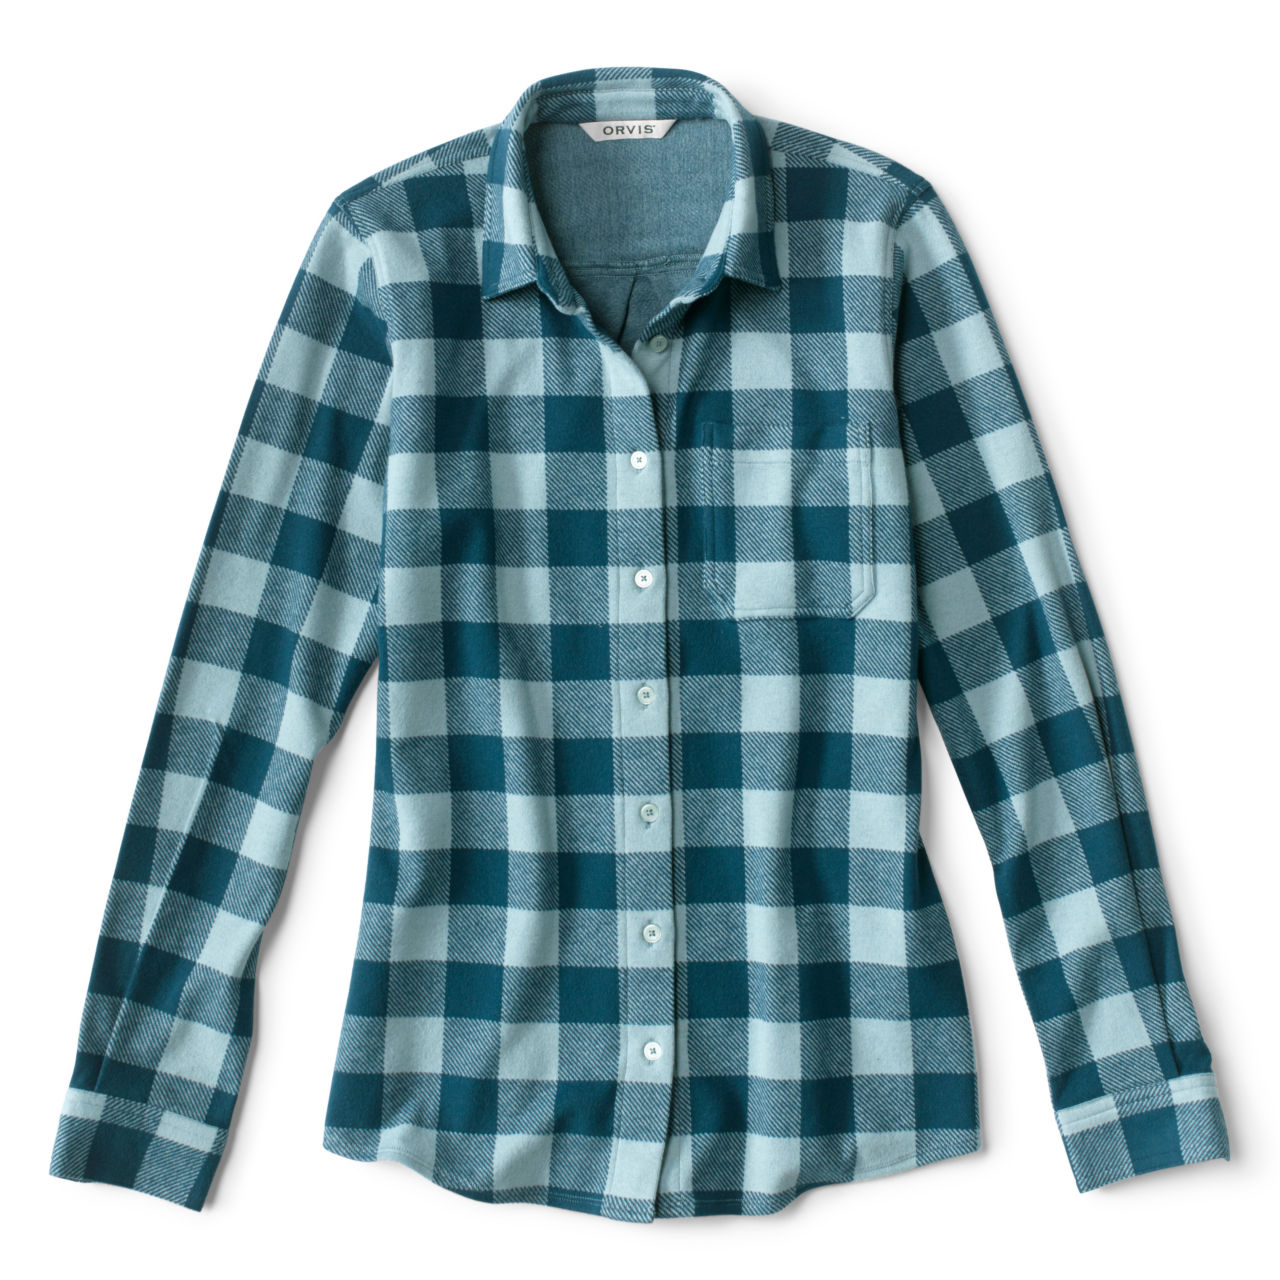 Snowy River Brushed Knit Long-Sleeved Shirt - MINERAL BLUE PLAID image number 1